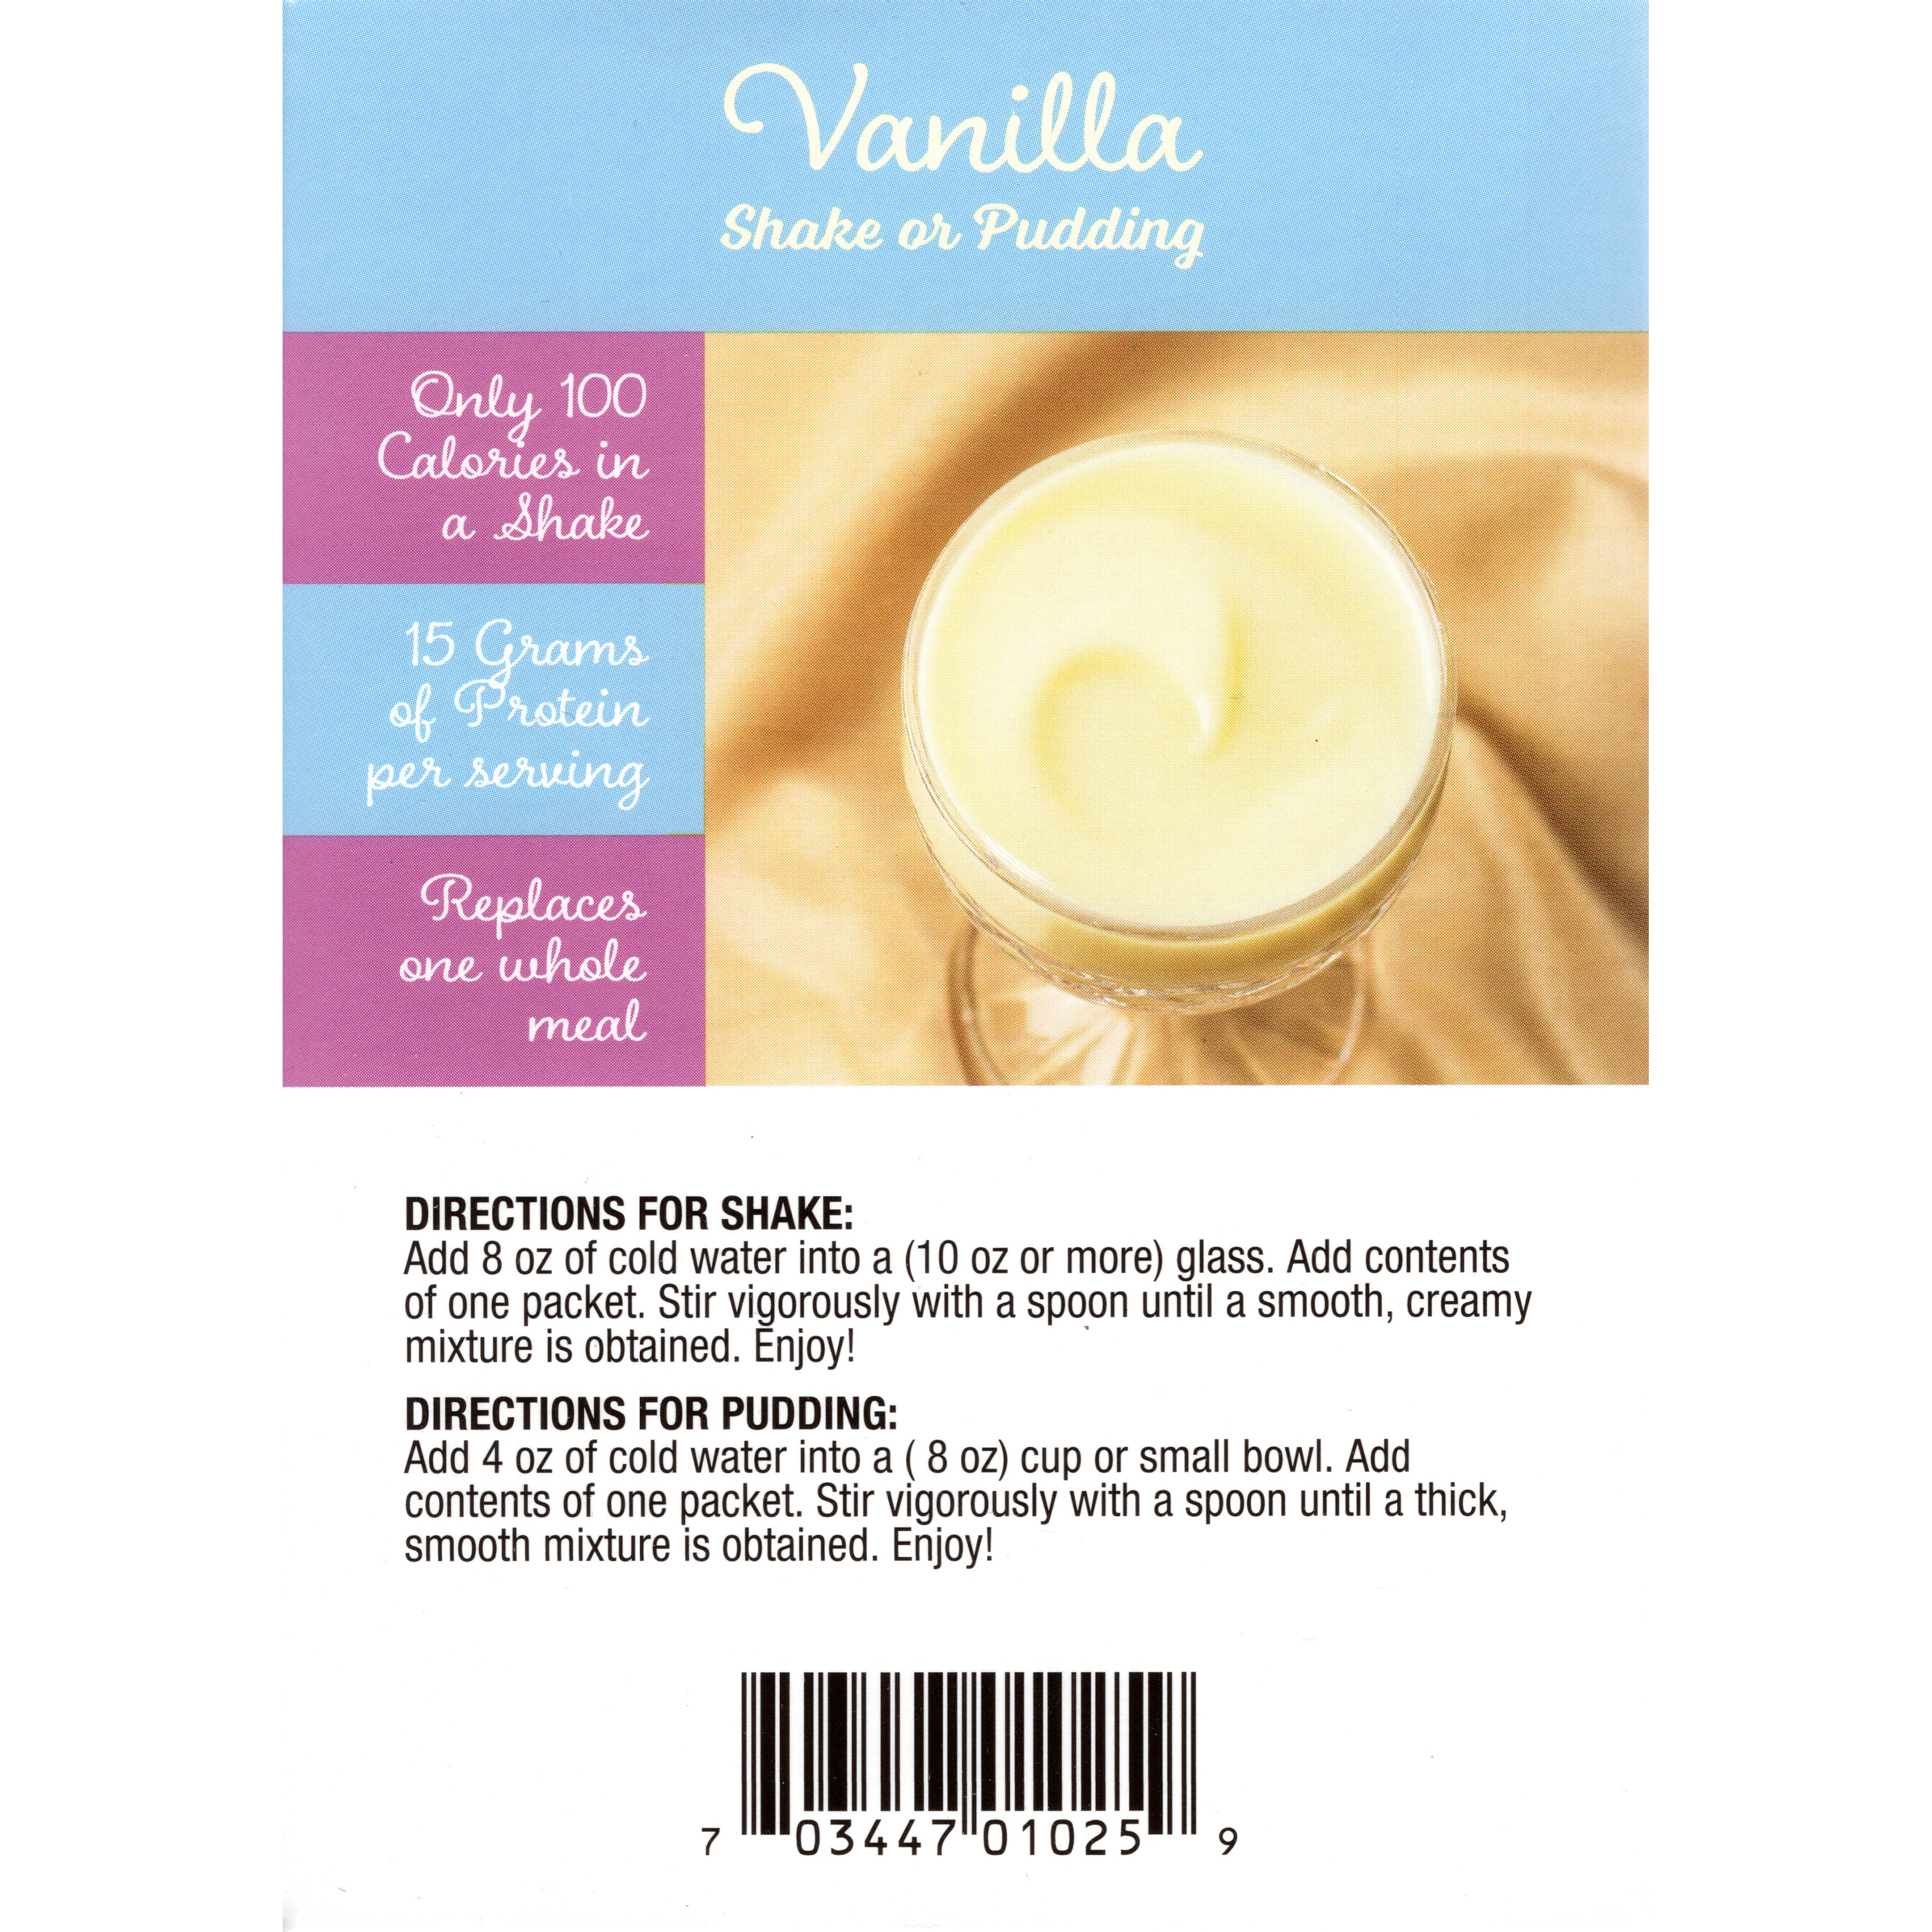 Vanilla High Protein Meal Replacement Shake - 7/Box